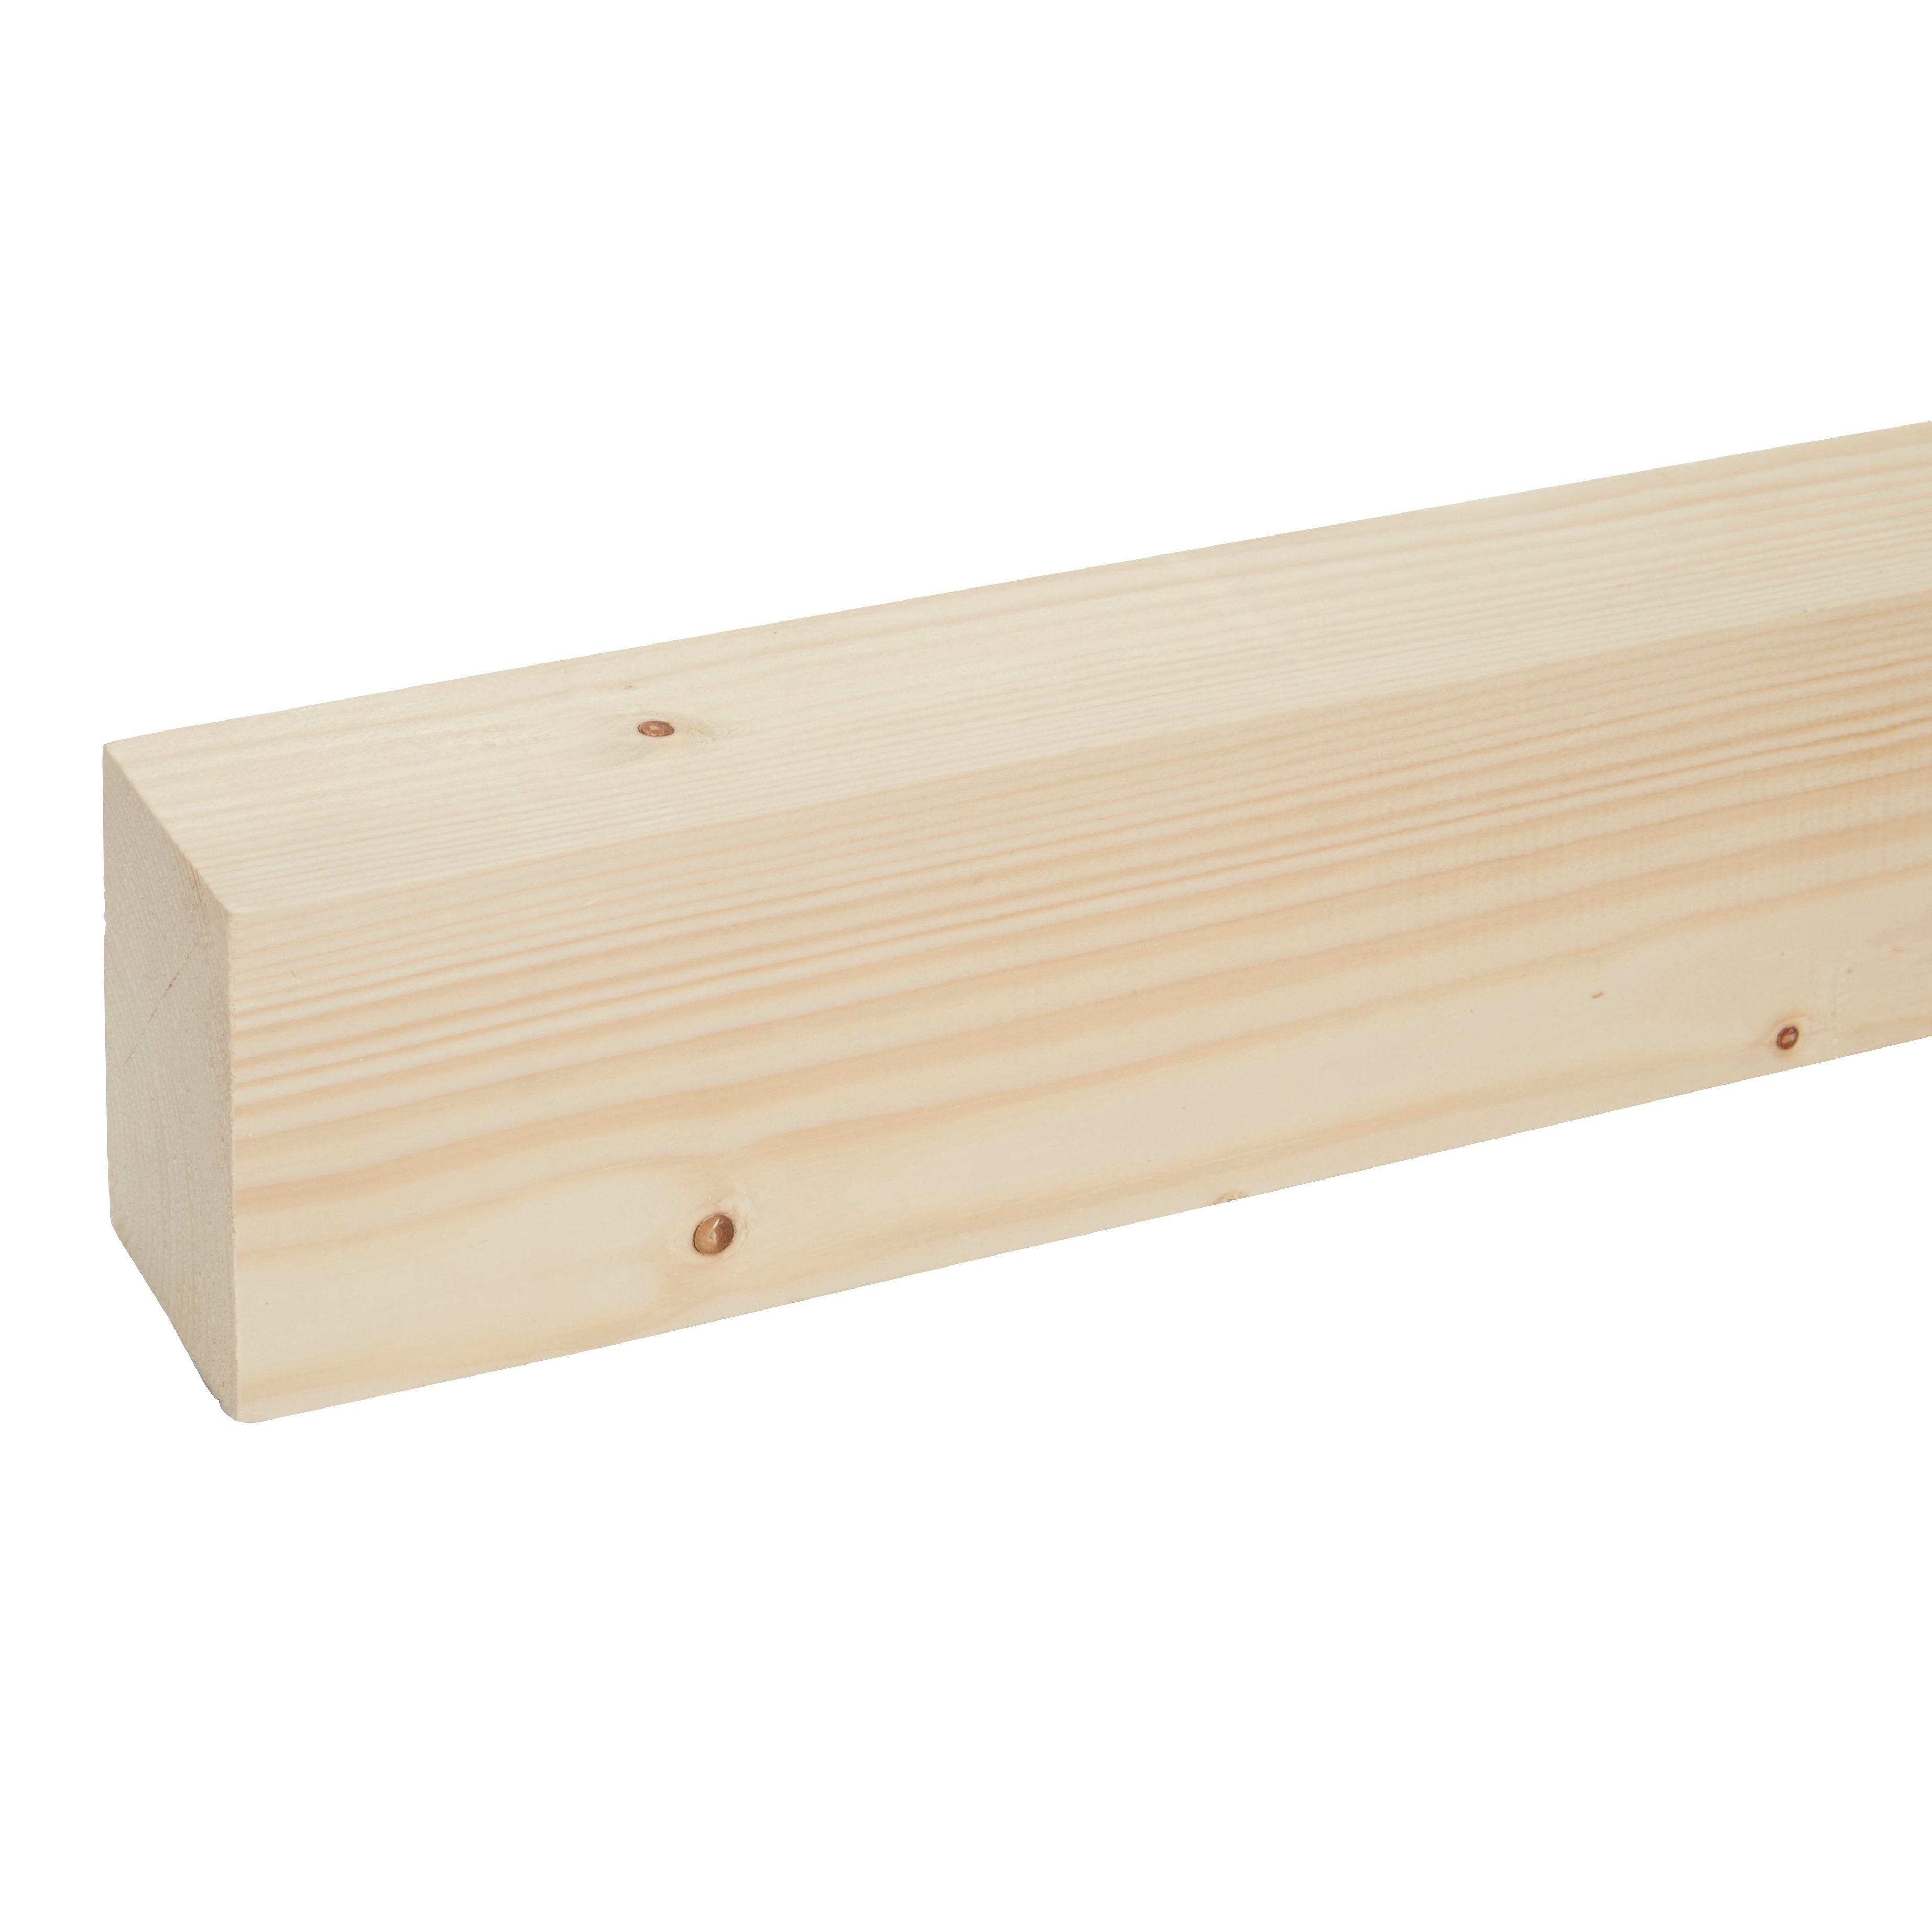 Smooth Planed Square Edge Whitewood Spruce Stick Timber L 2 4m W 94mm T 69mm Pack Of 3 Diy At B Q